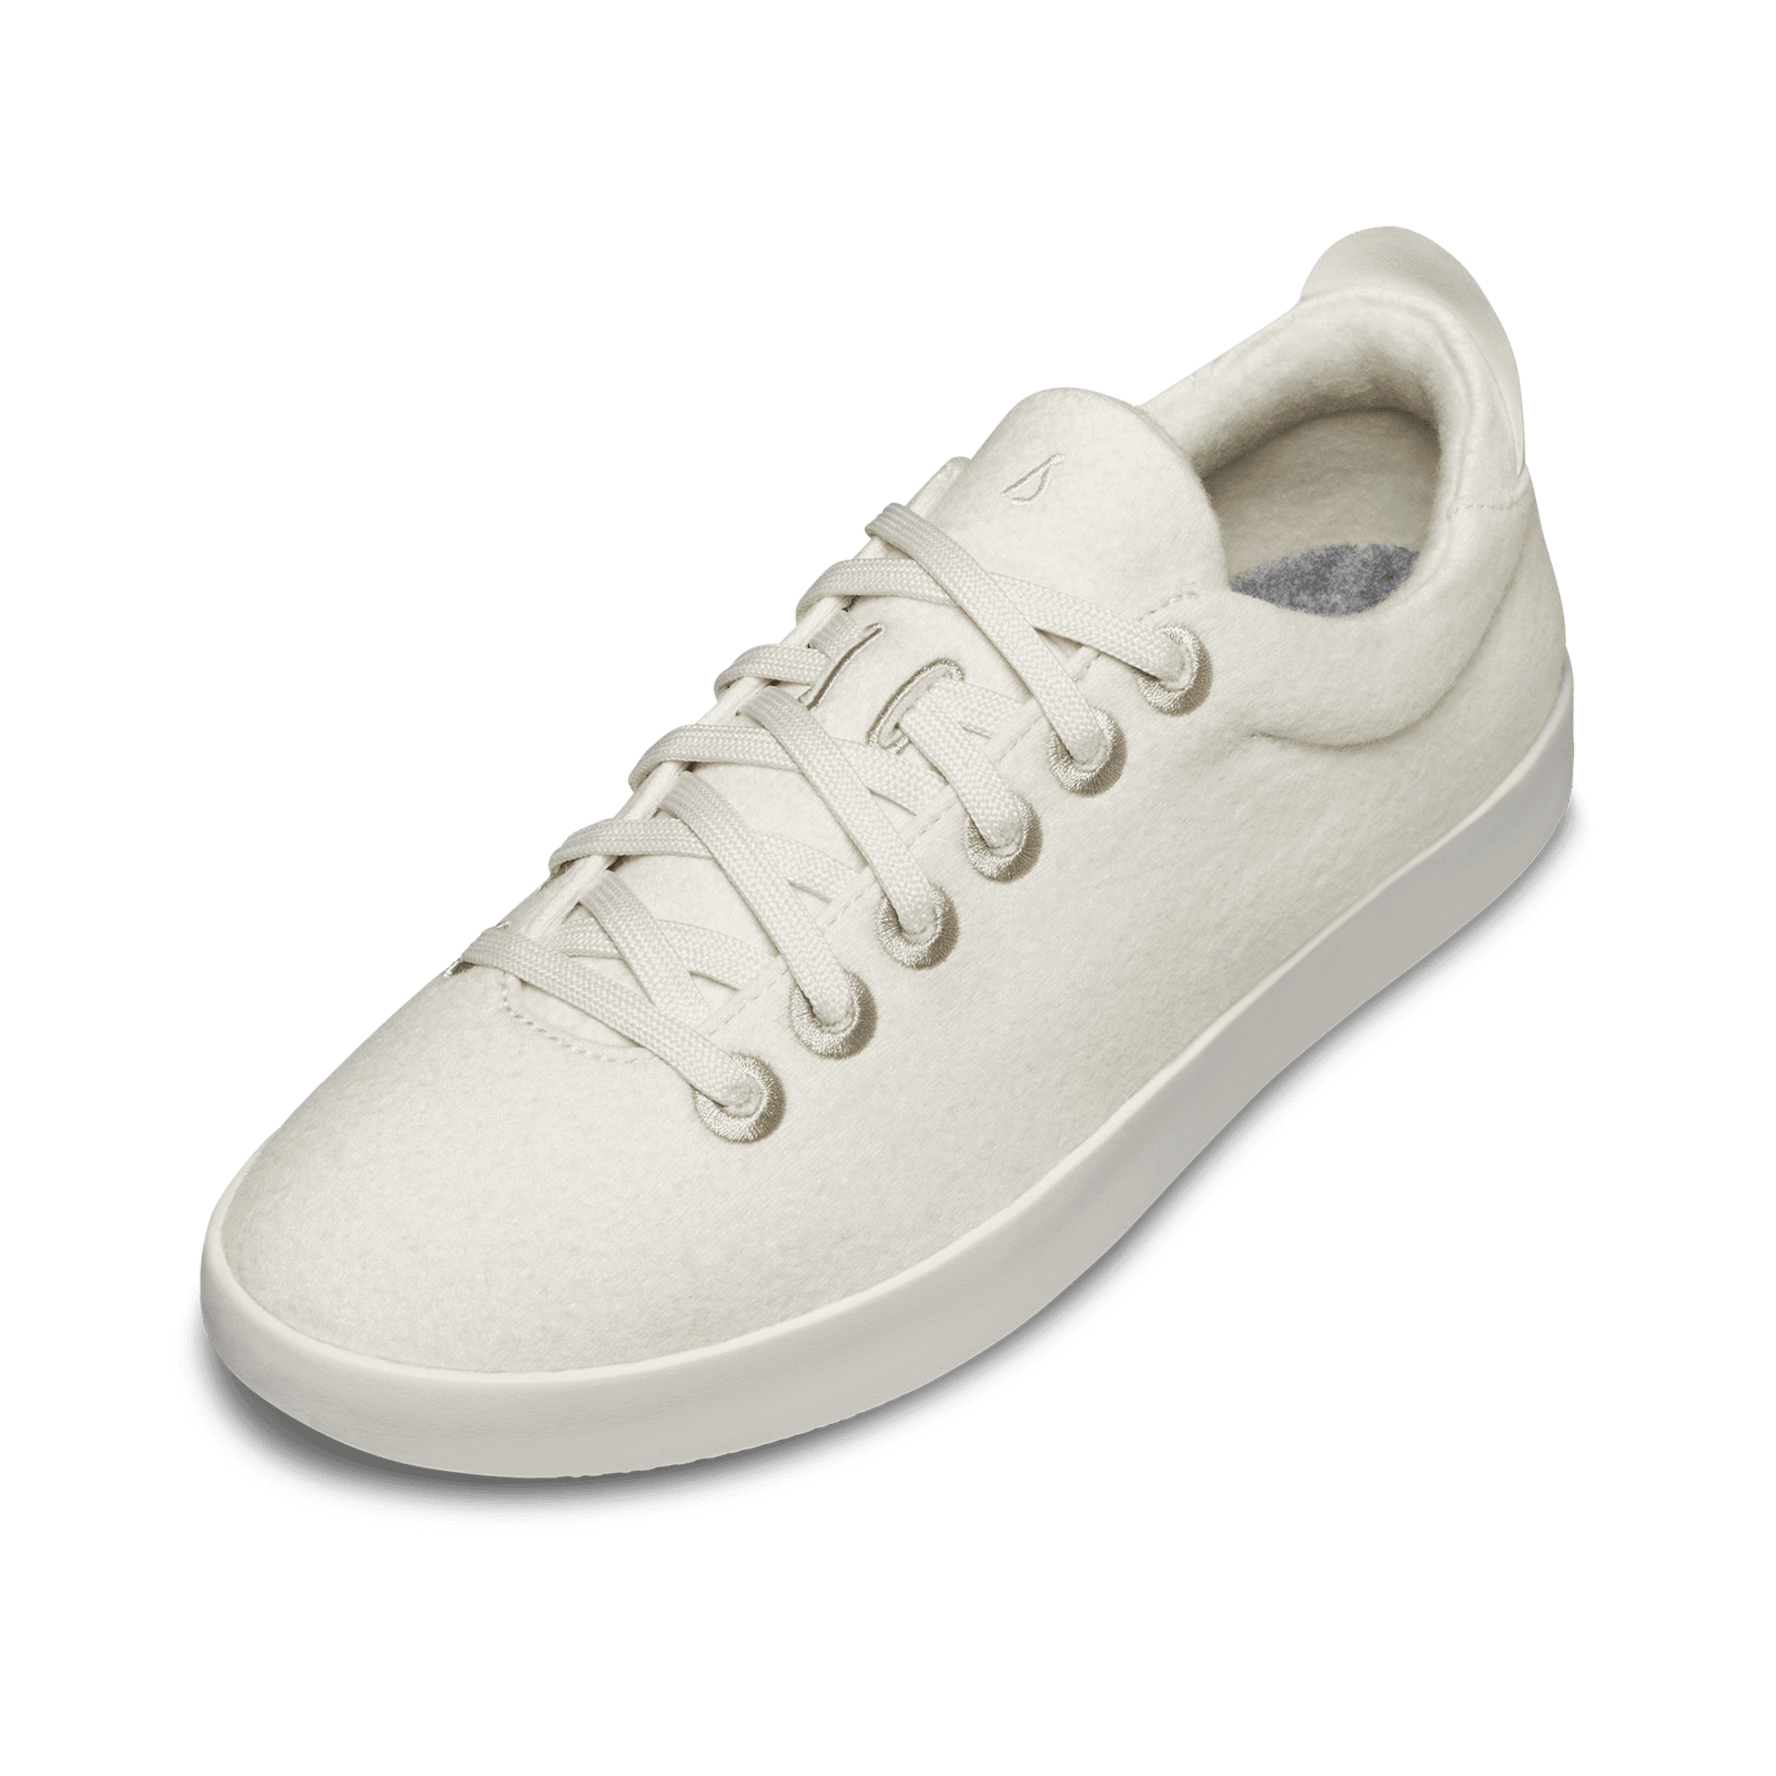 For Walking sneakers in white